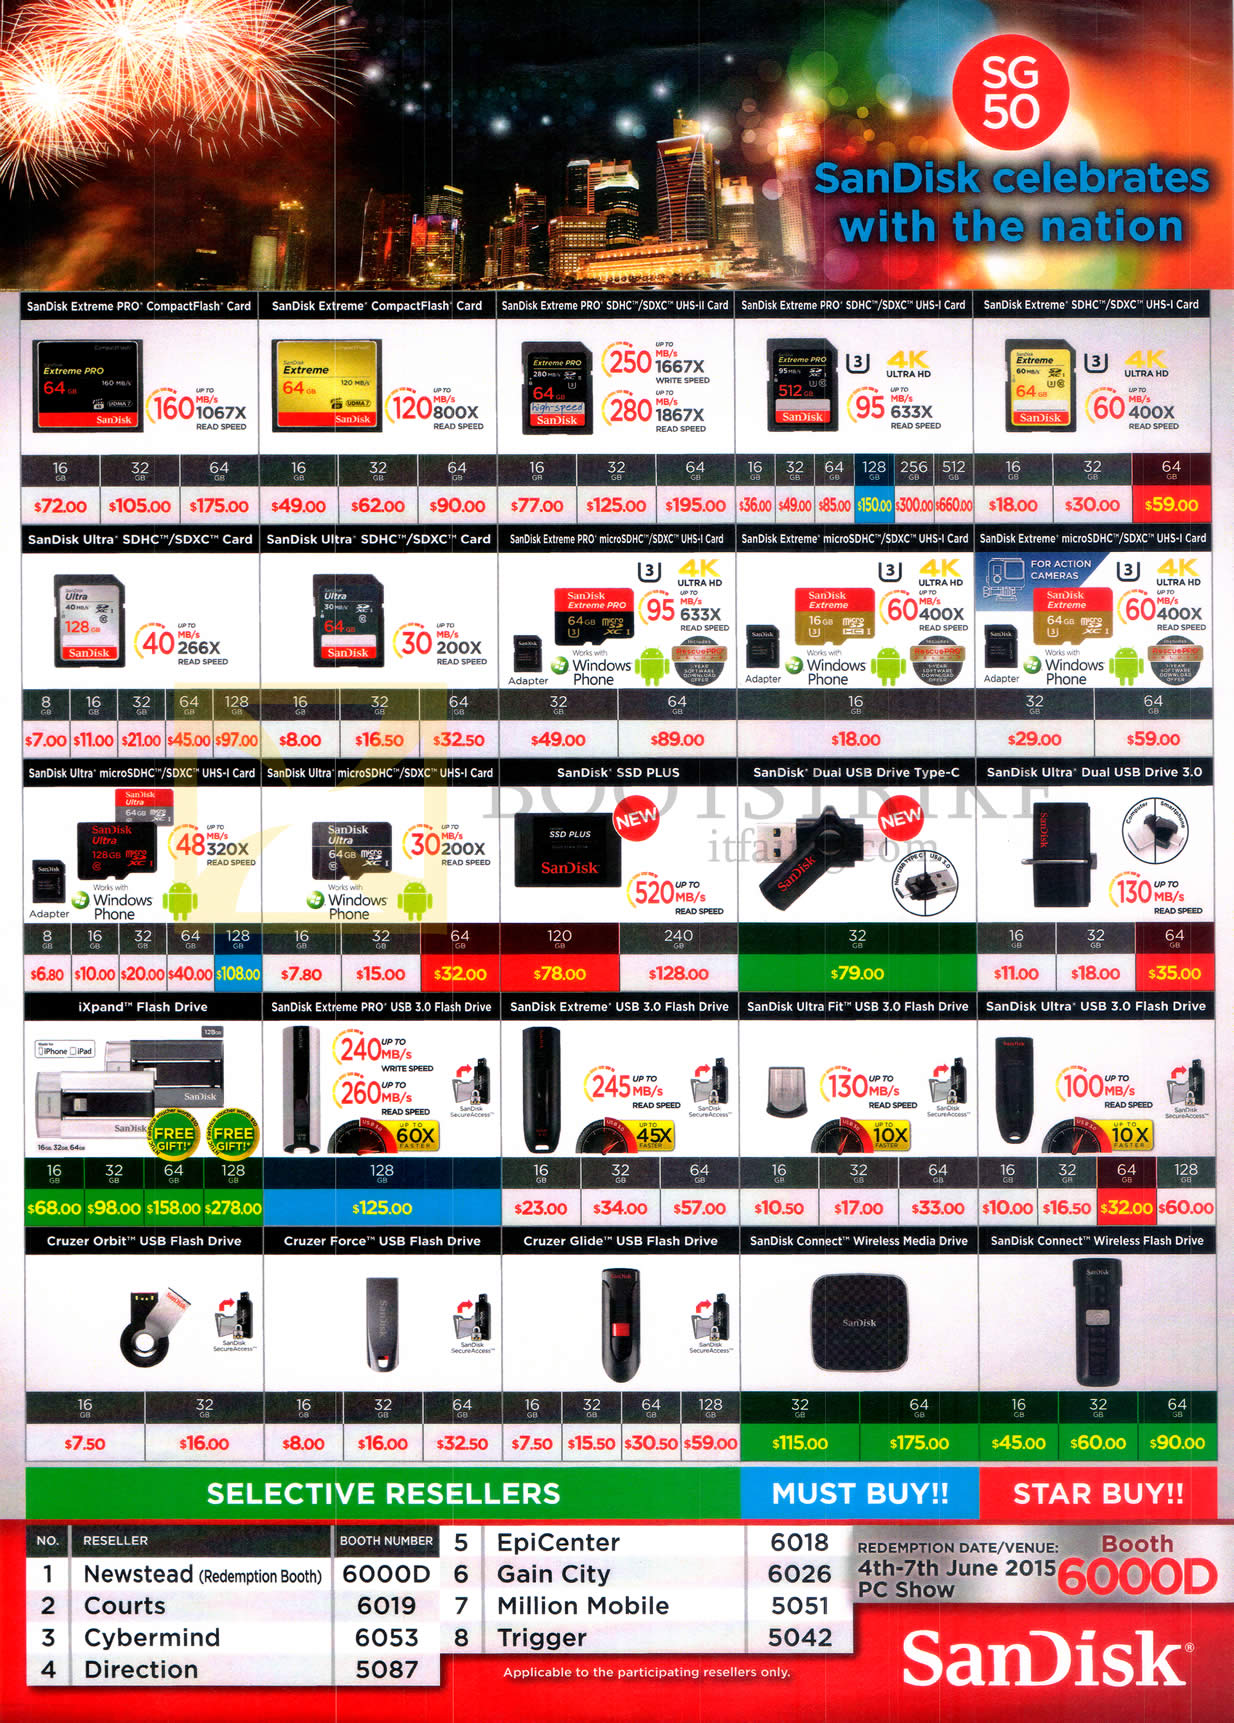 PC SHOW 2015 price list image brochure of Sandisk MicroSD Cards, USB Flash Drives SSD Plus, IXpand, Cruzer Force, Cruzer Glide, Connect, Ultra Fit